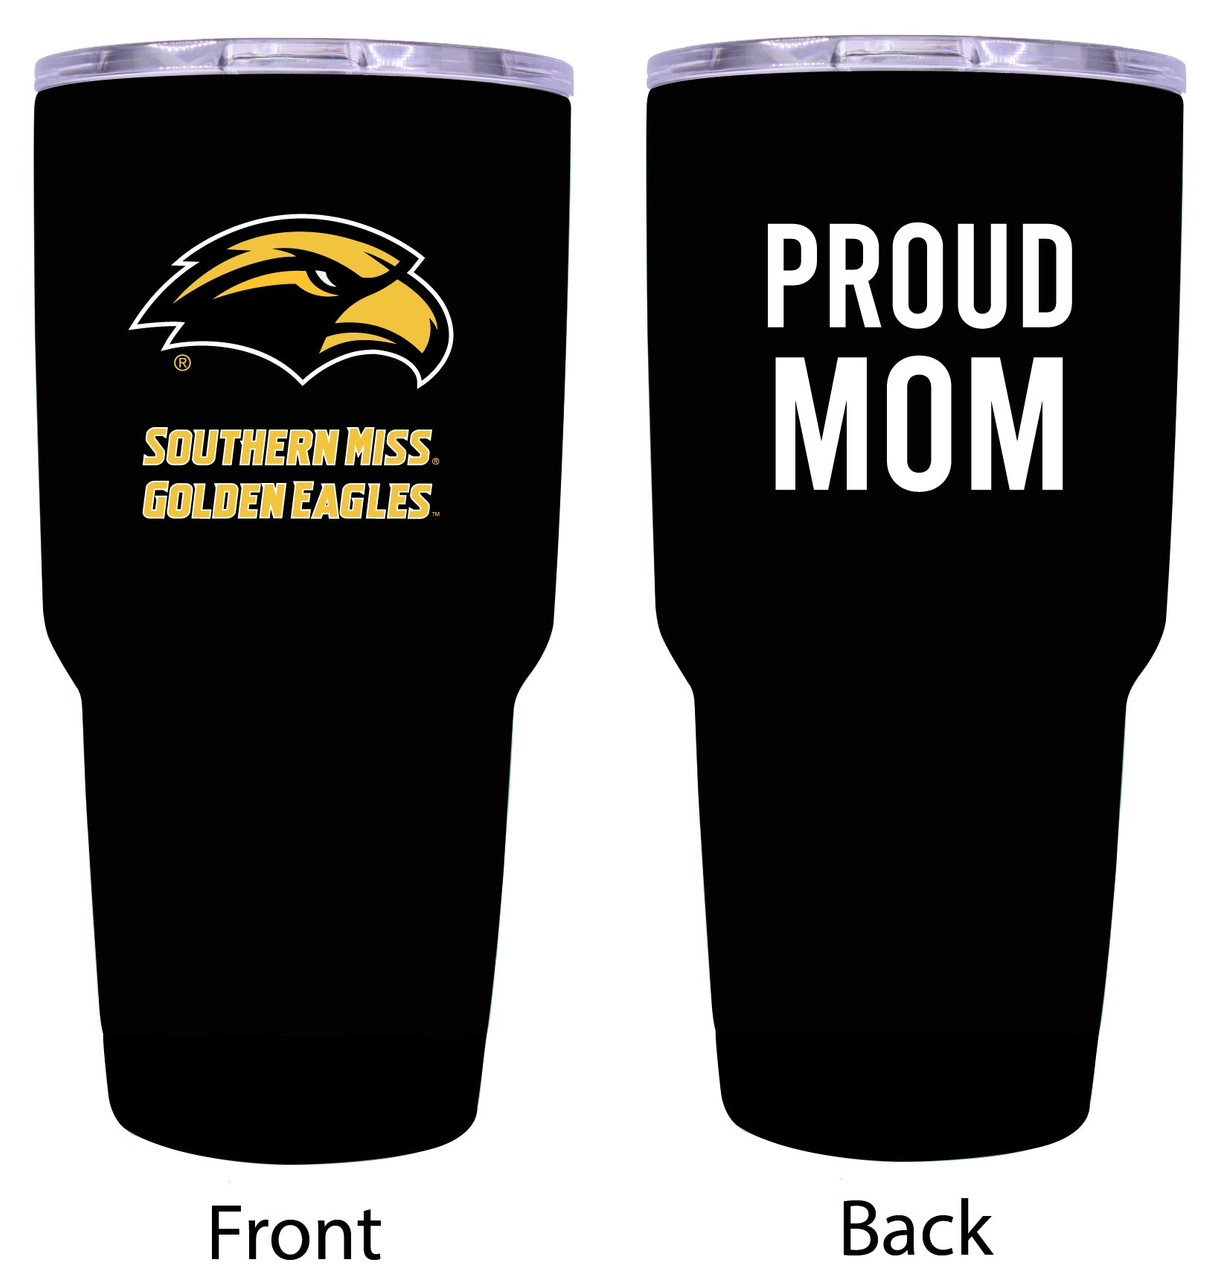 Southern Mississippi Golden Eagles Proud Mom 24 oz Insulated Stainless Steel Tumblers Black.